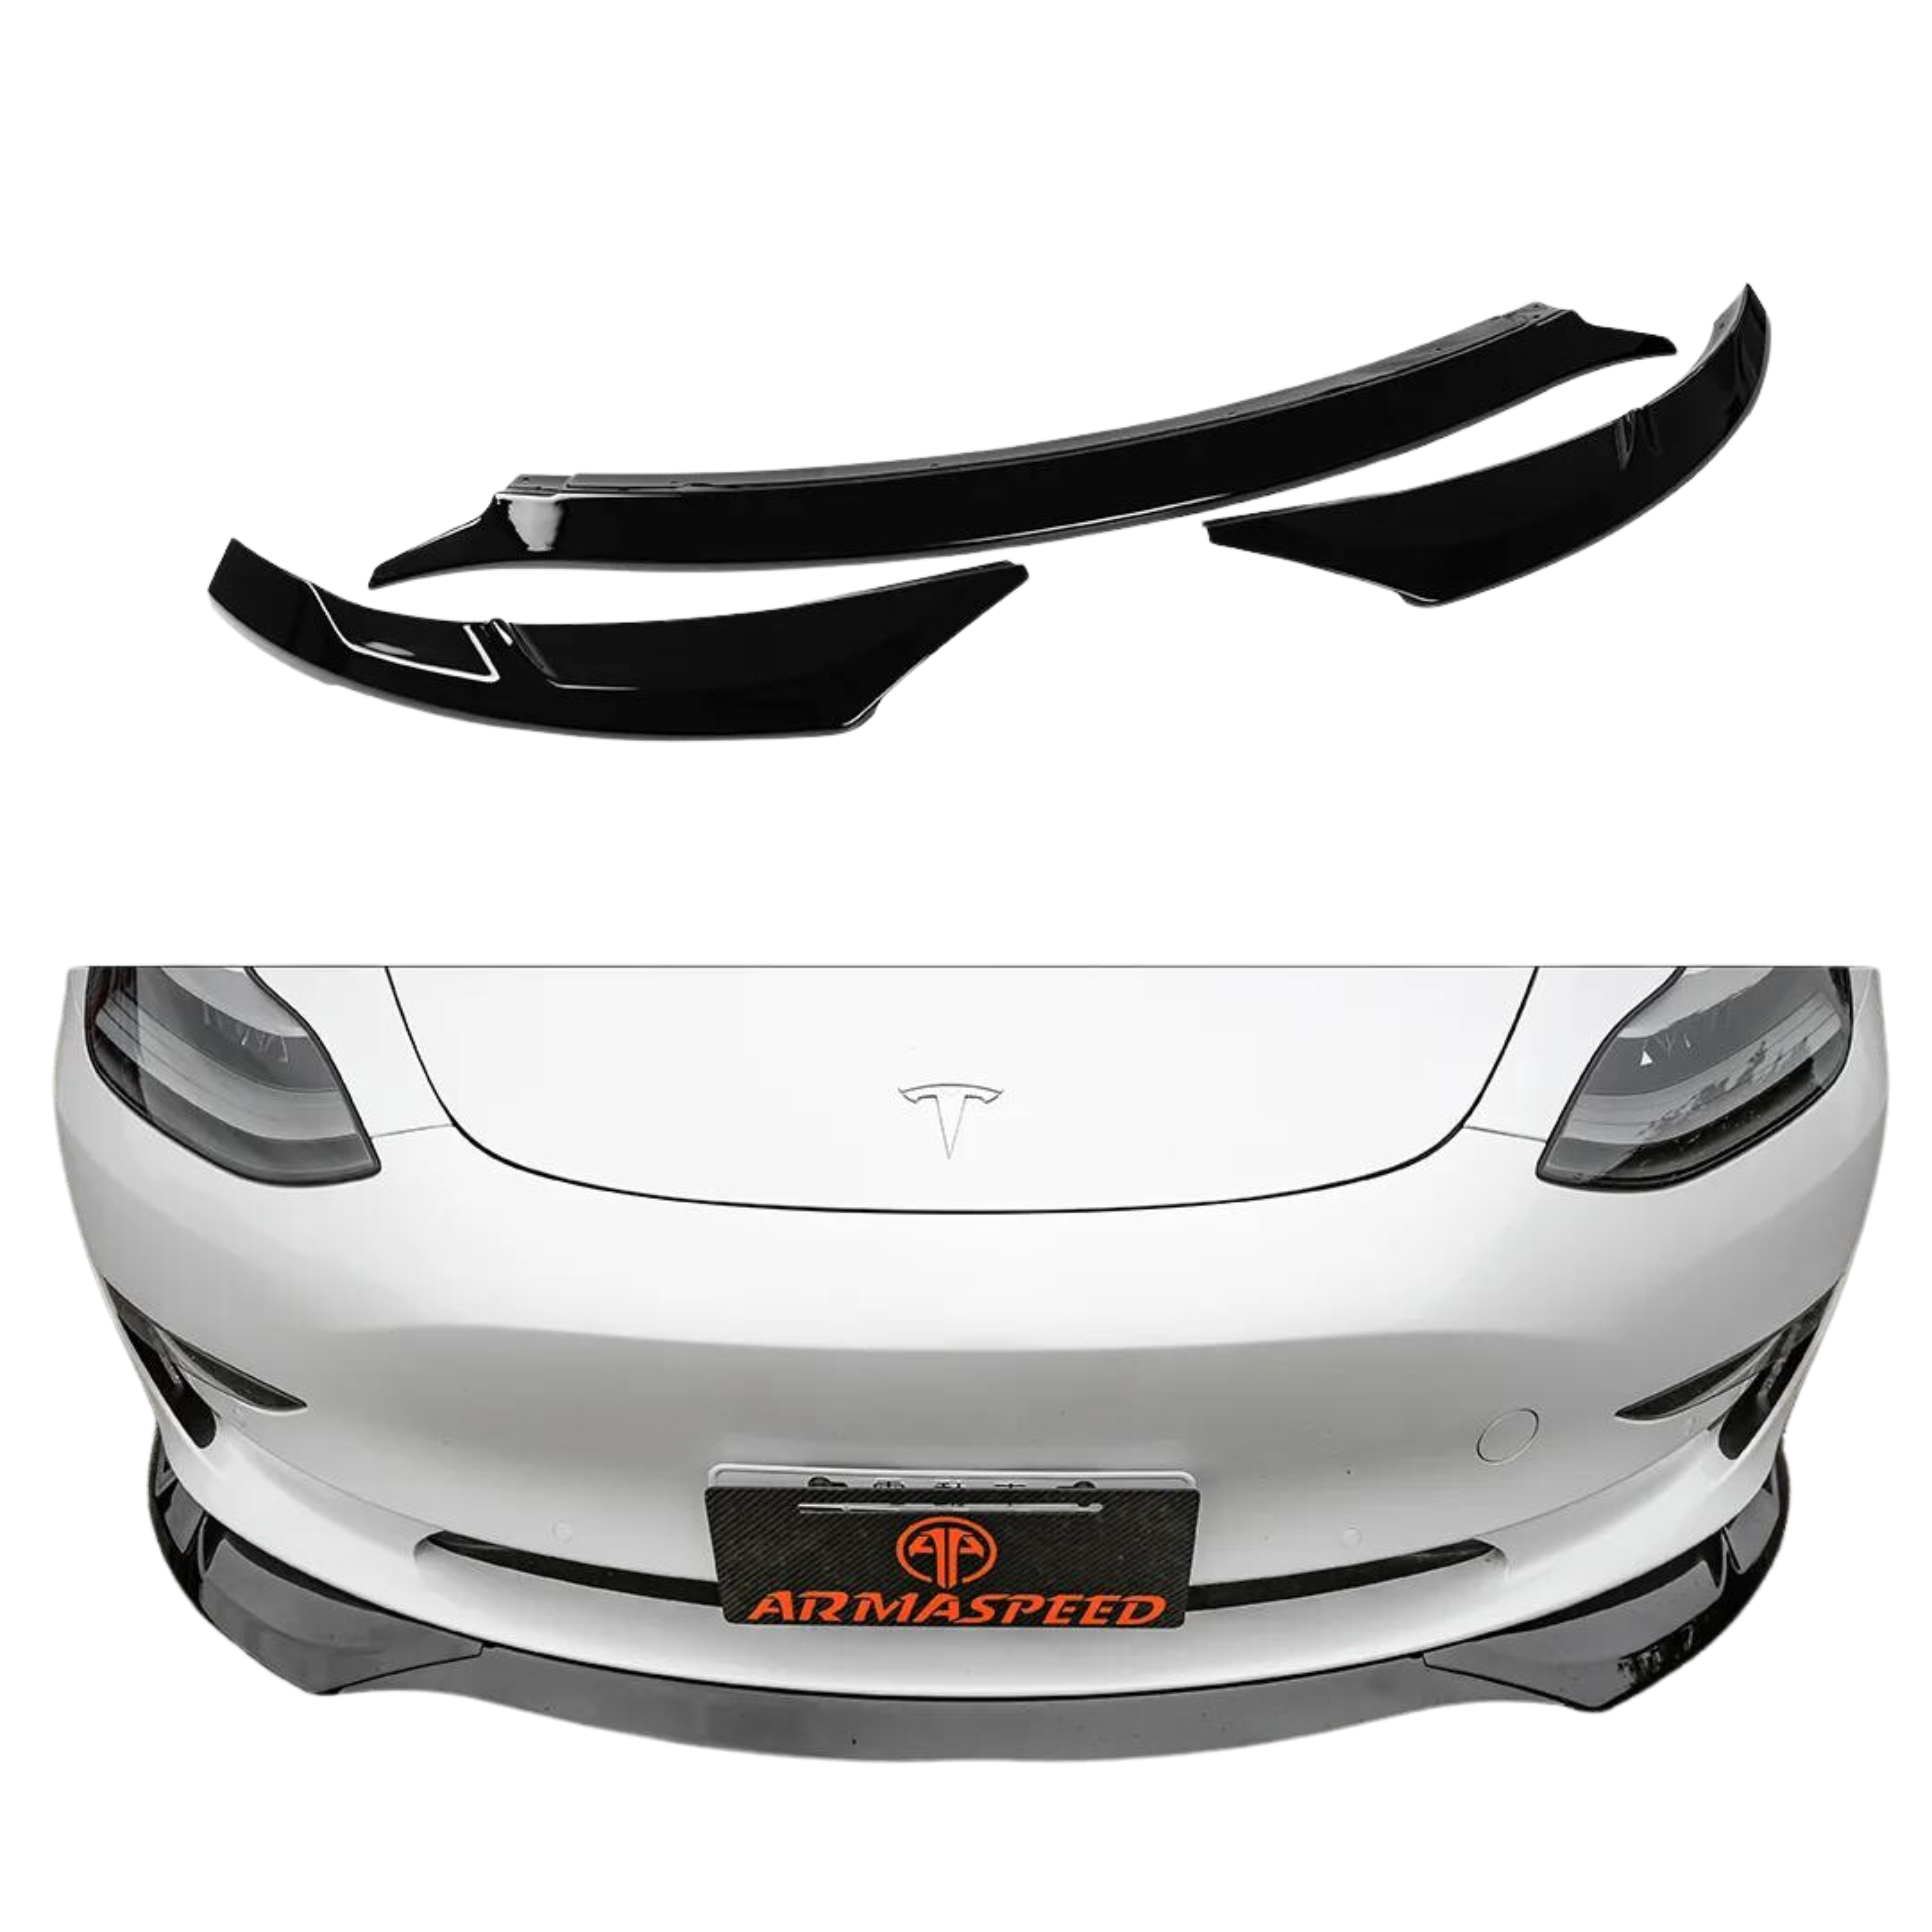 NOBLESSE Aero Rear Diffuser (FRP), Body Kit Pieces for Tesla Model 3